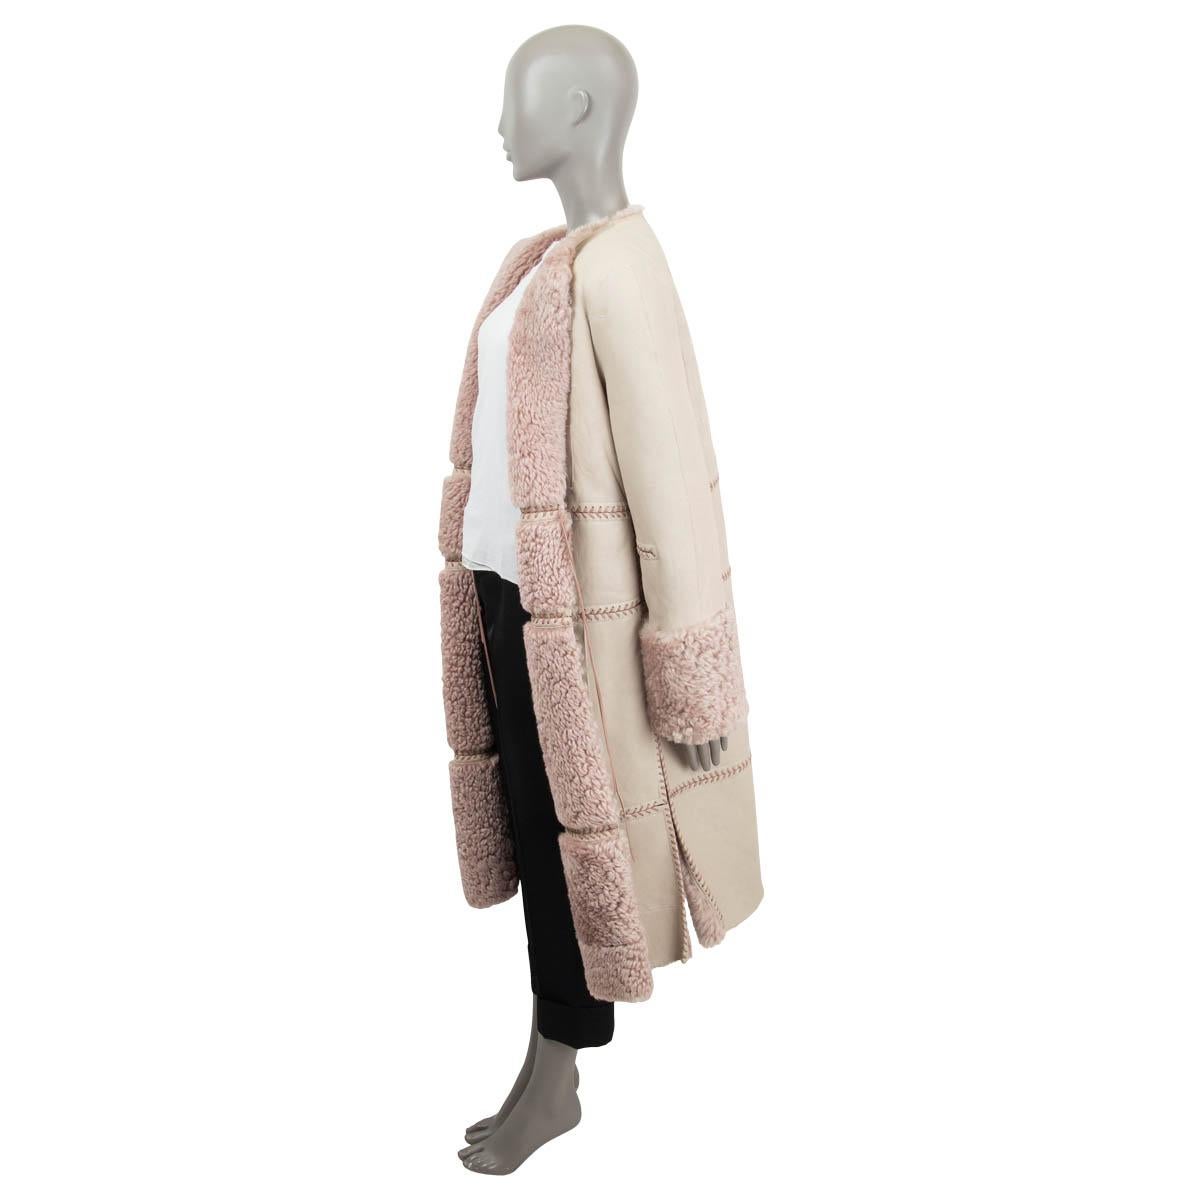 100% authentic Alexander McQueen open shearling coat in sand and dusty rose dyed lamb leather and shearling (100%). Features leather fringes and slits on the sides. Has a barely visible open seam on the back, otherwise in excellent